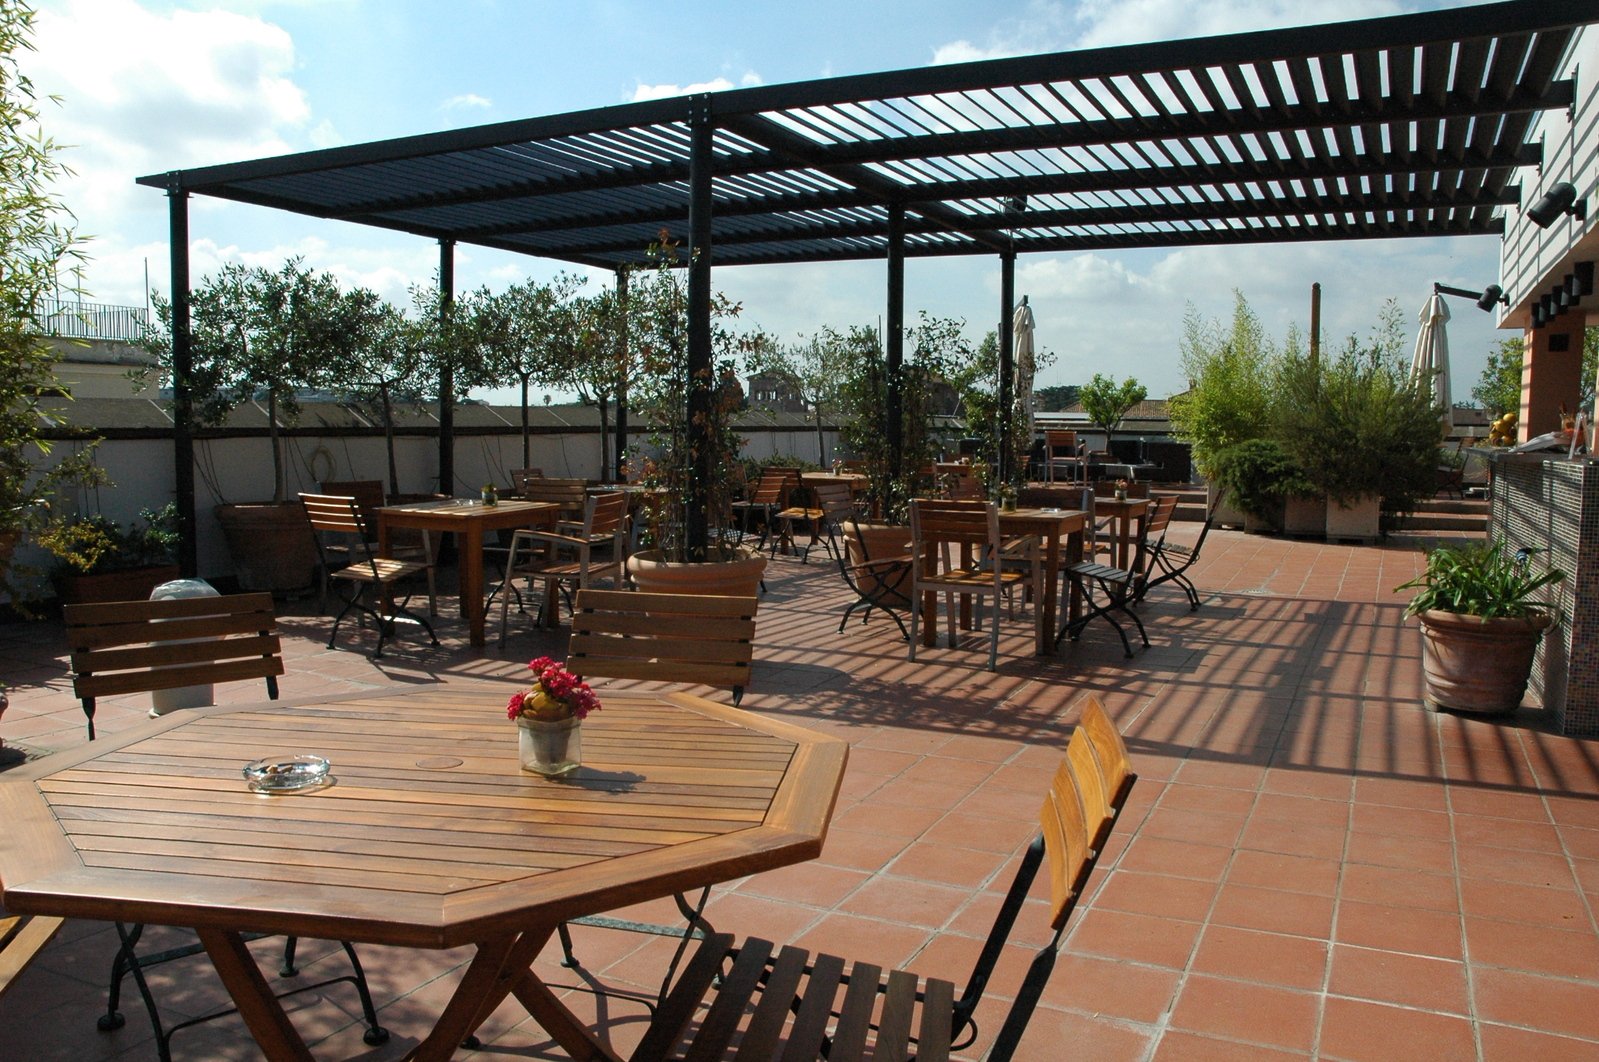 the patio is set up with an outside dining area and an attached terrace